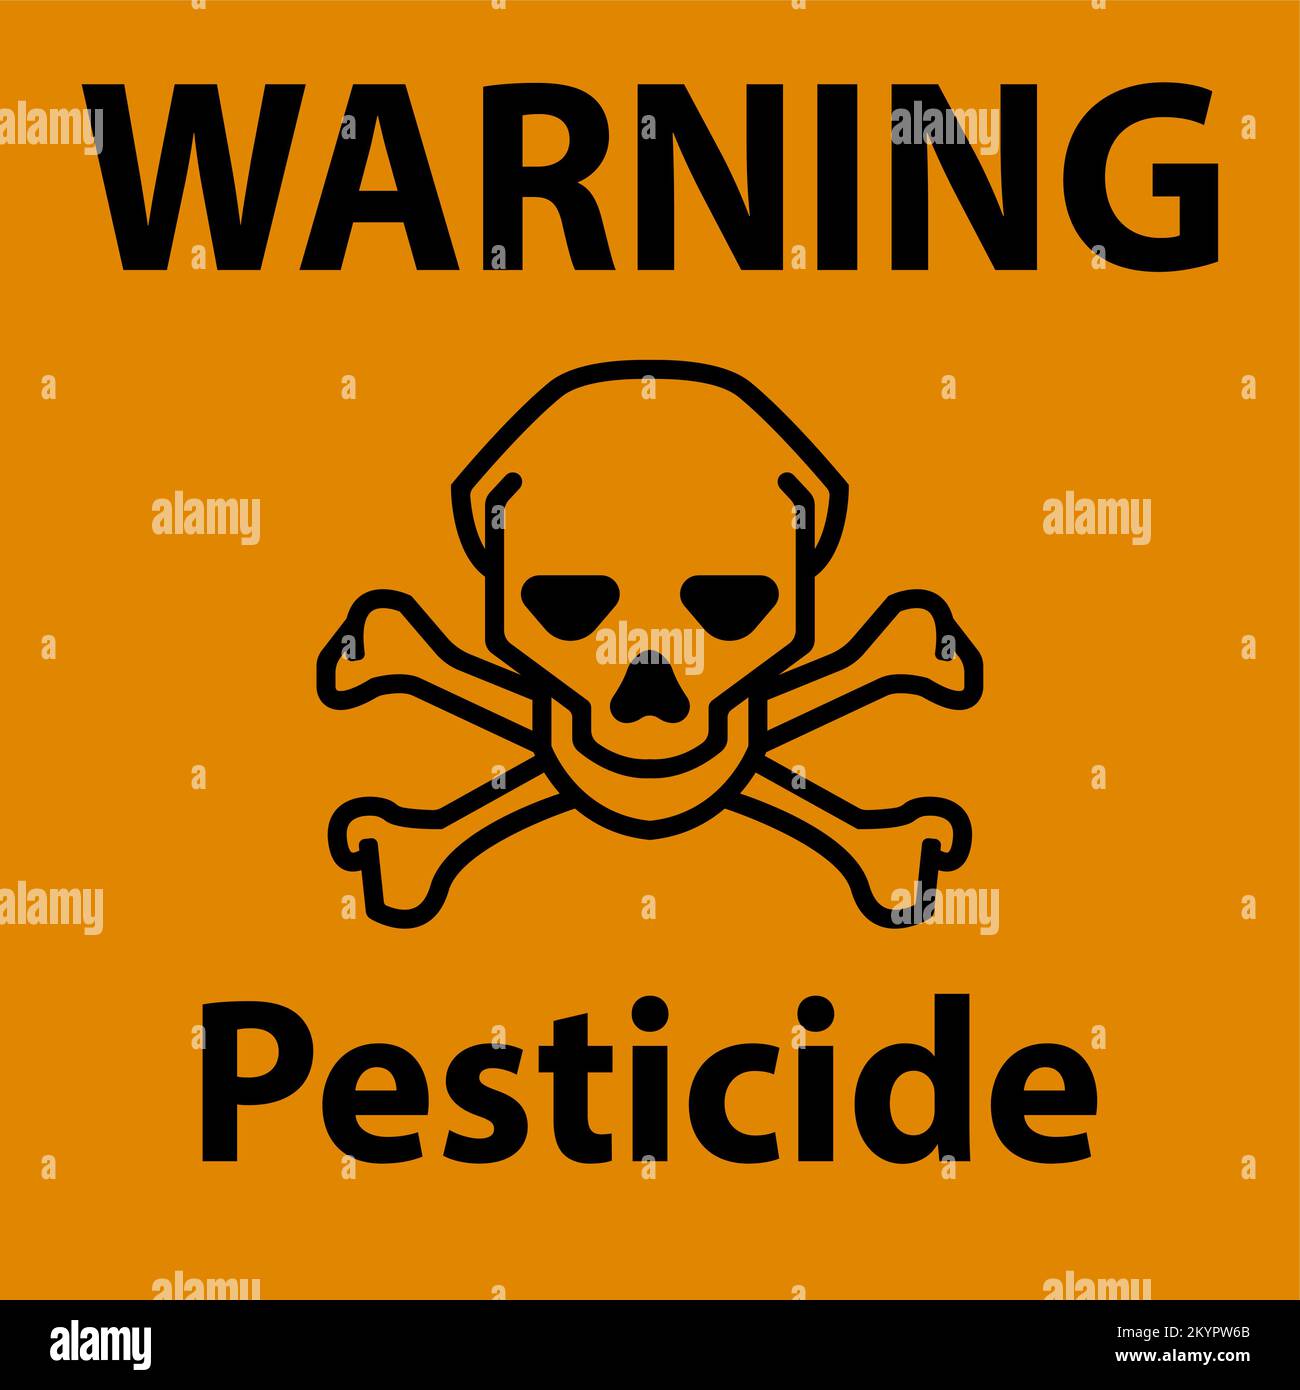 Warning Pesticide Symbol Sign On White Background Stock Vector